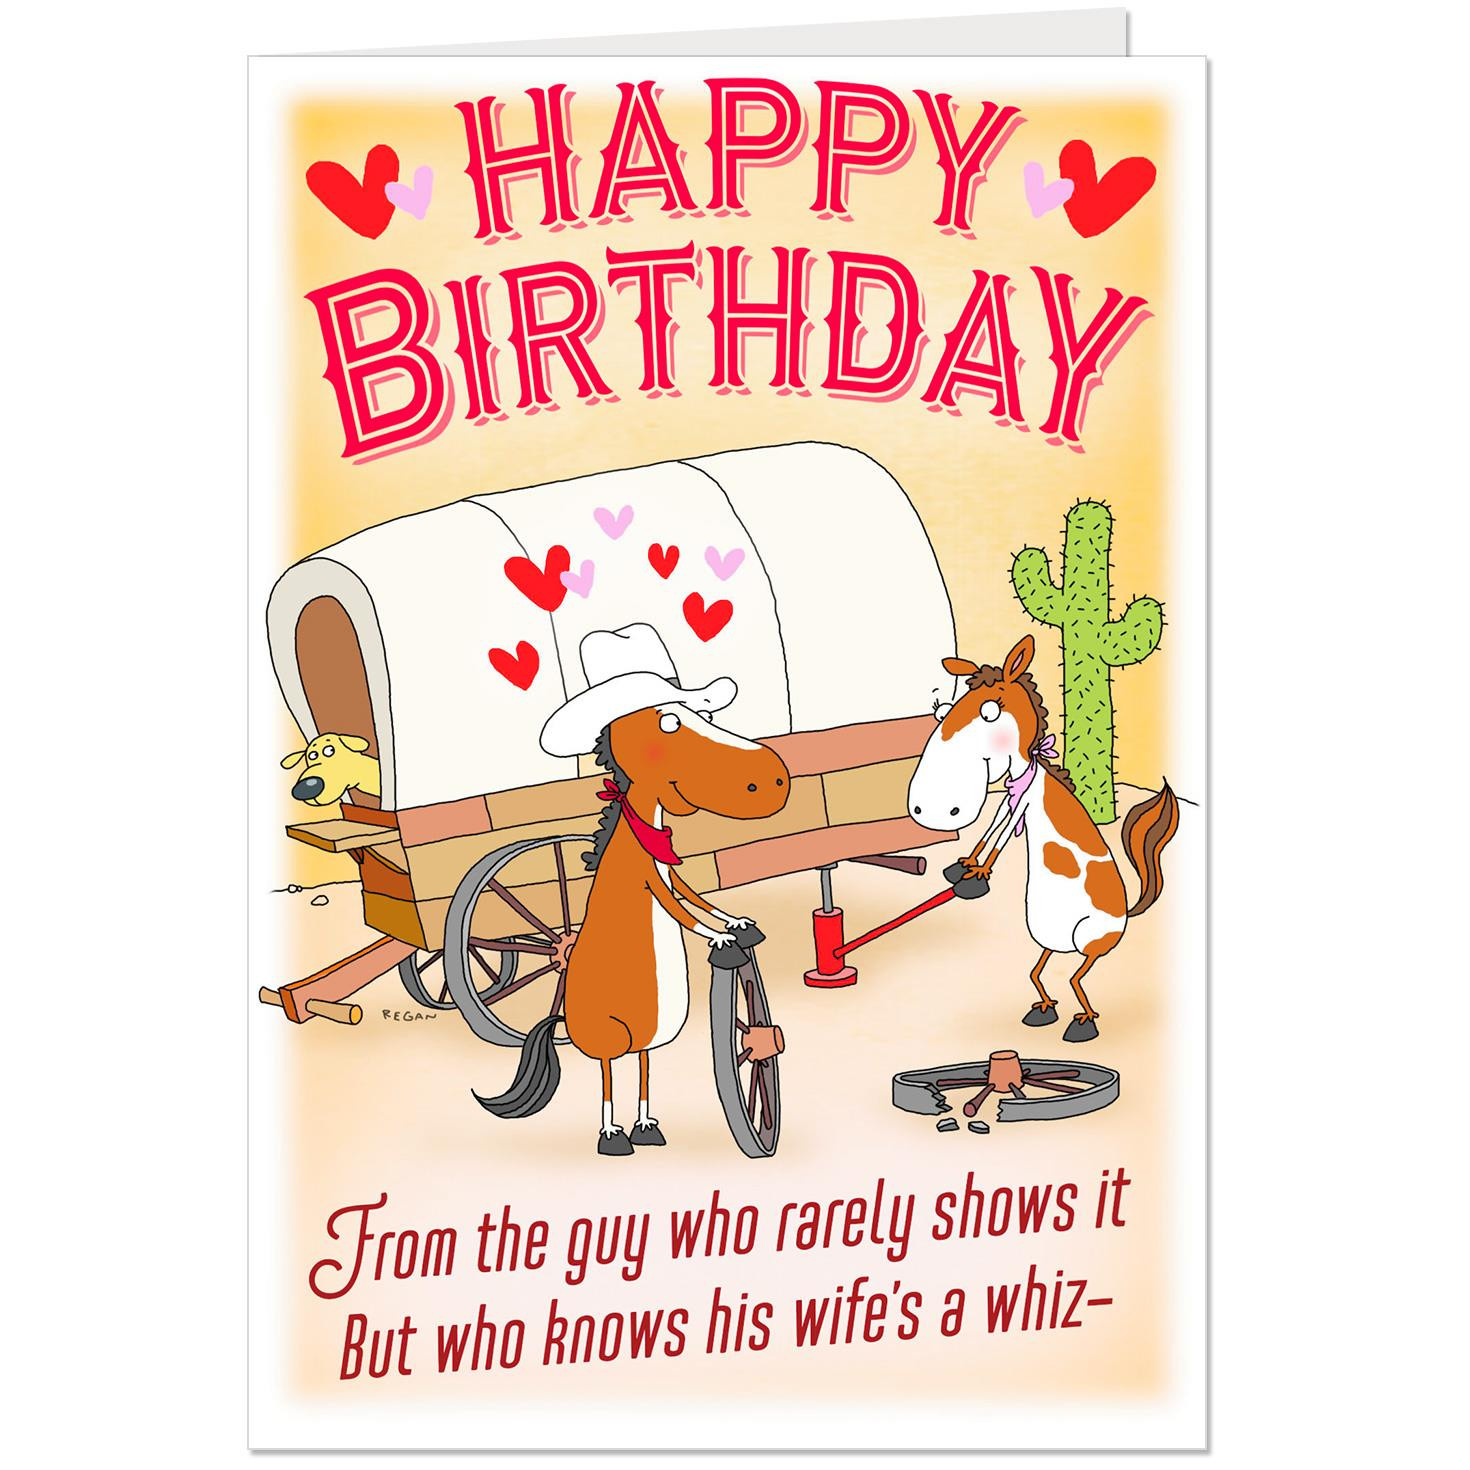 Funny Birthday Card Pictures
 Wild About You Funny Birthday Card for Wife Greeting